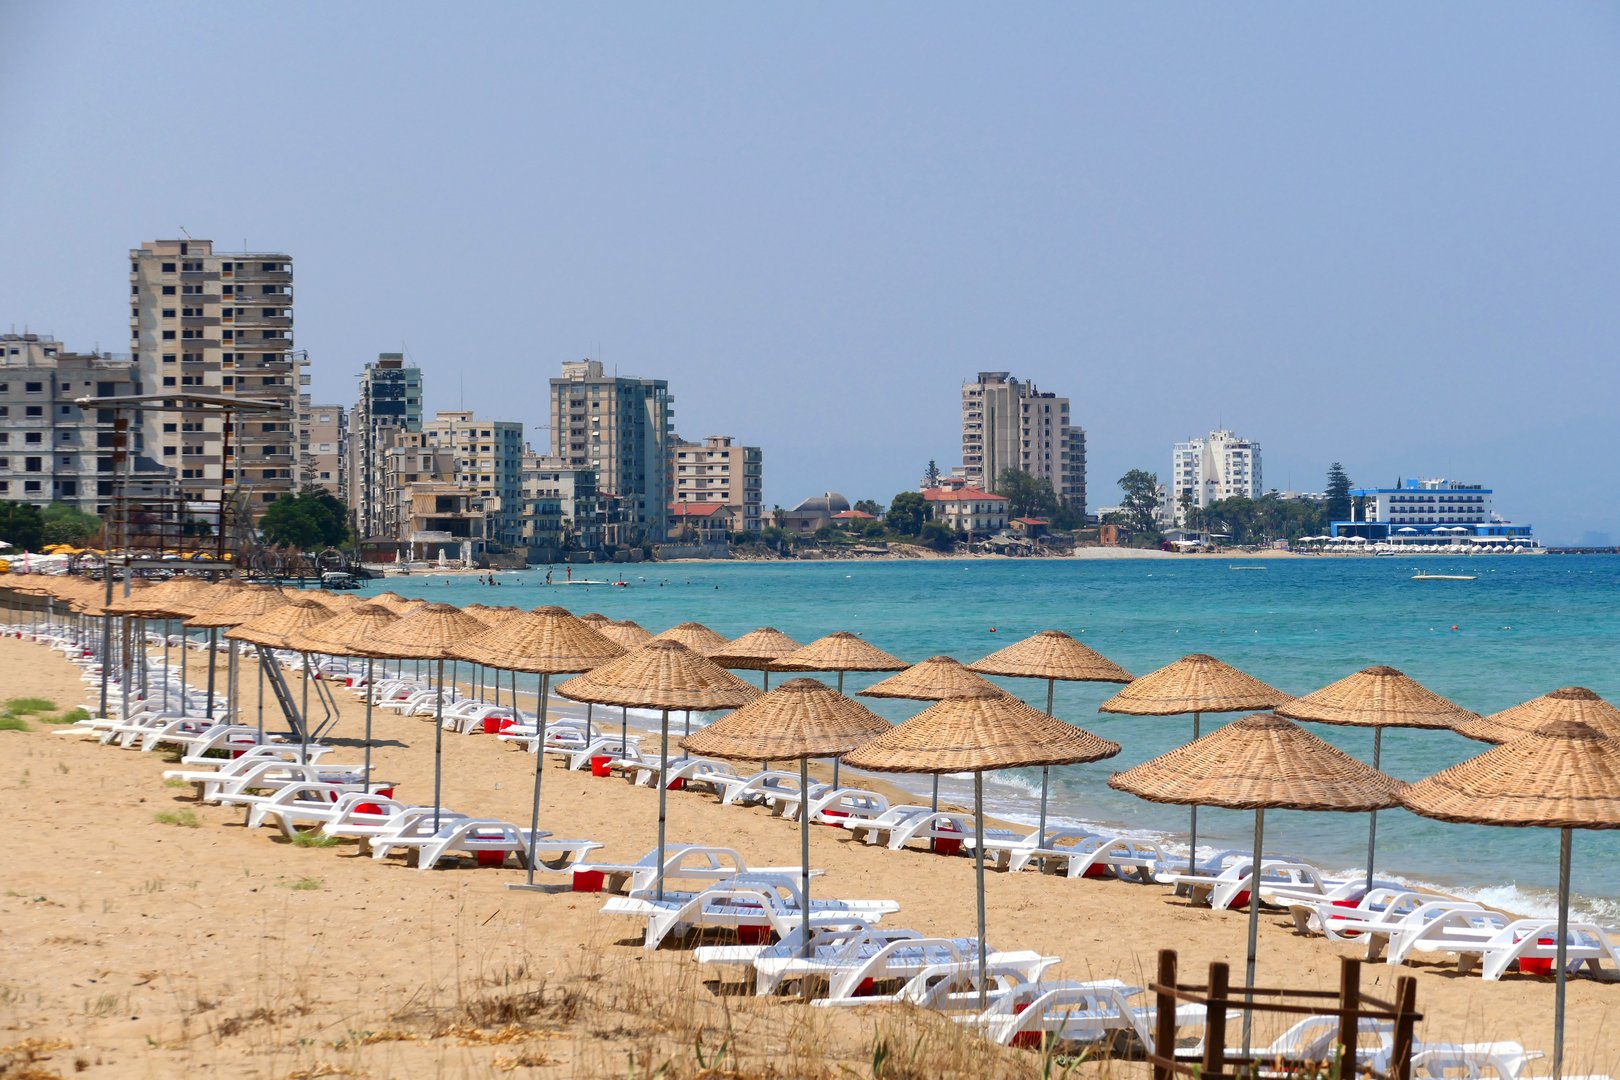 Over 1.8 million visited Varosha since its reopening